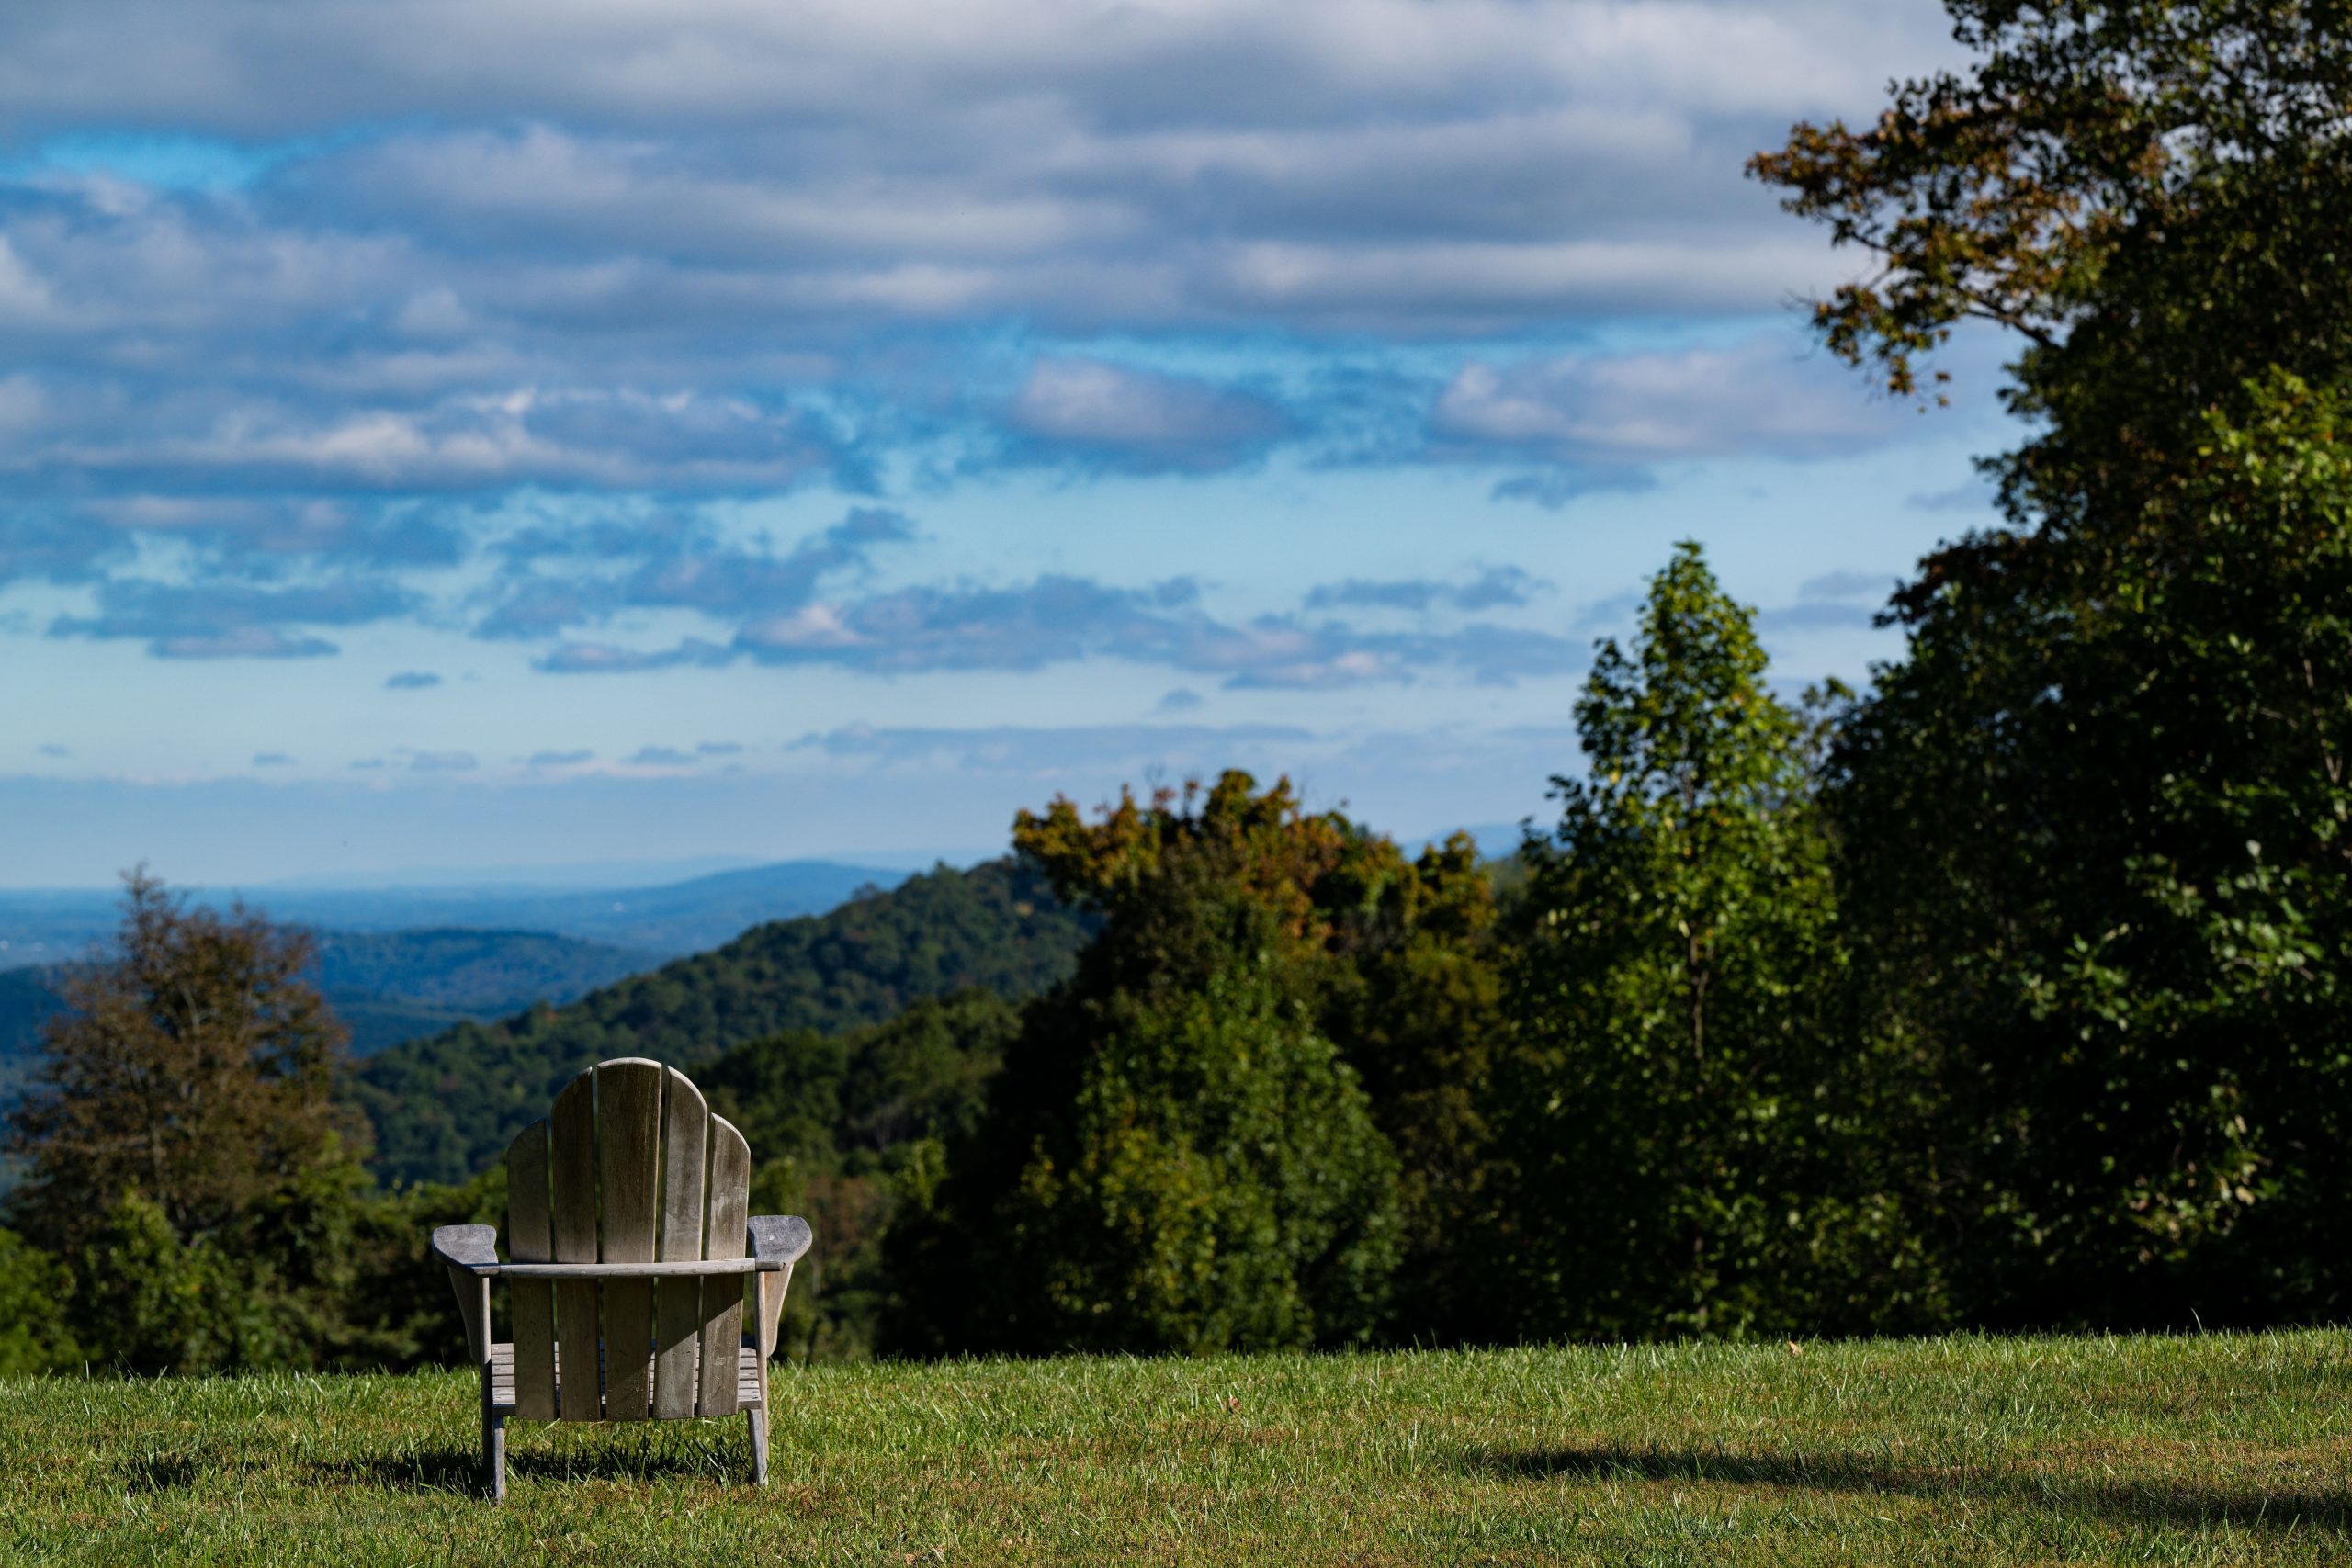 A view of a lawn chair facing the mountains and blue skies.